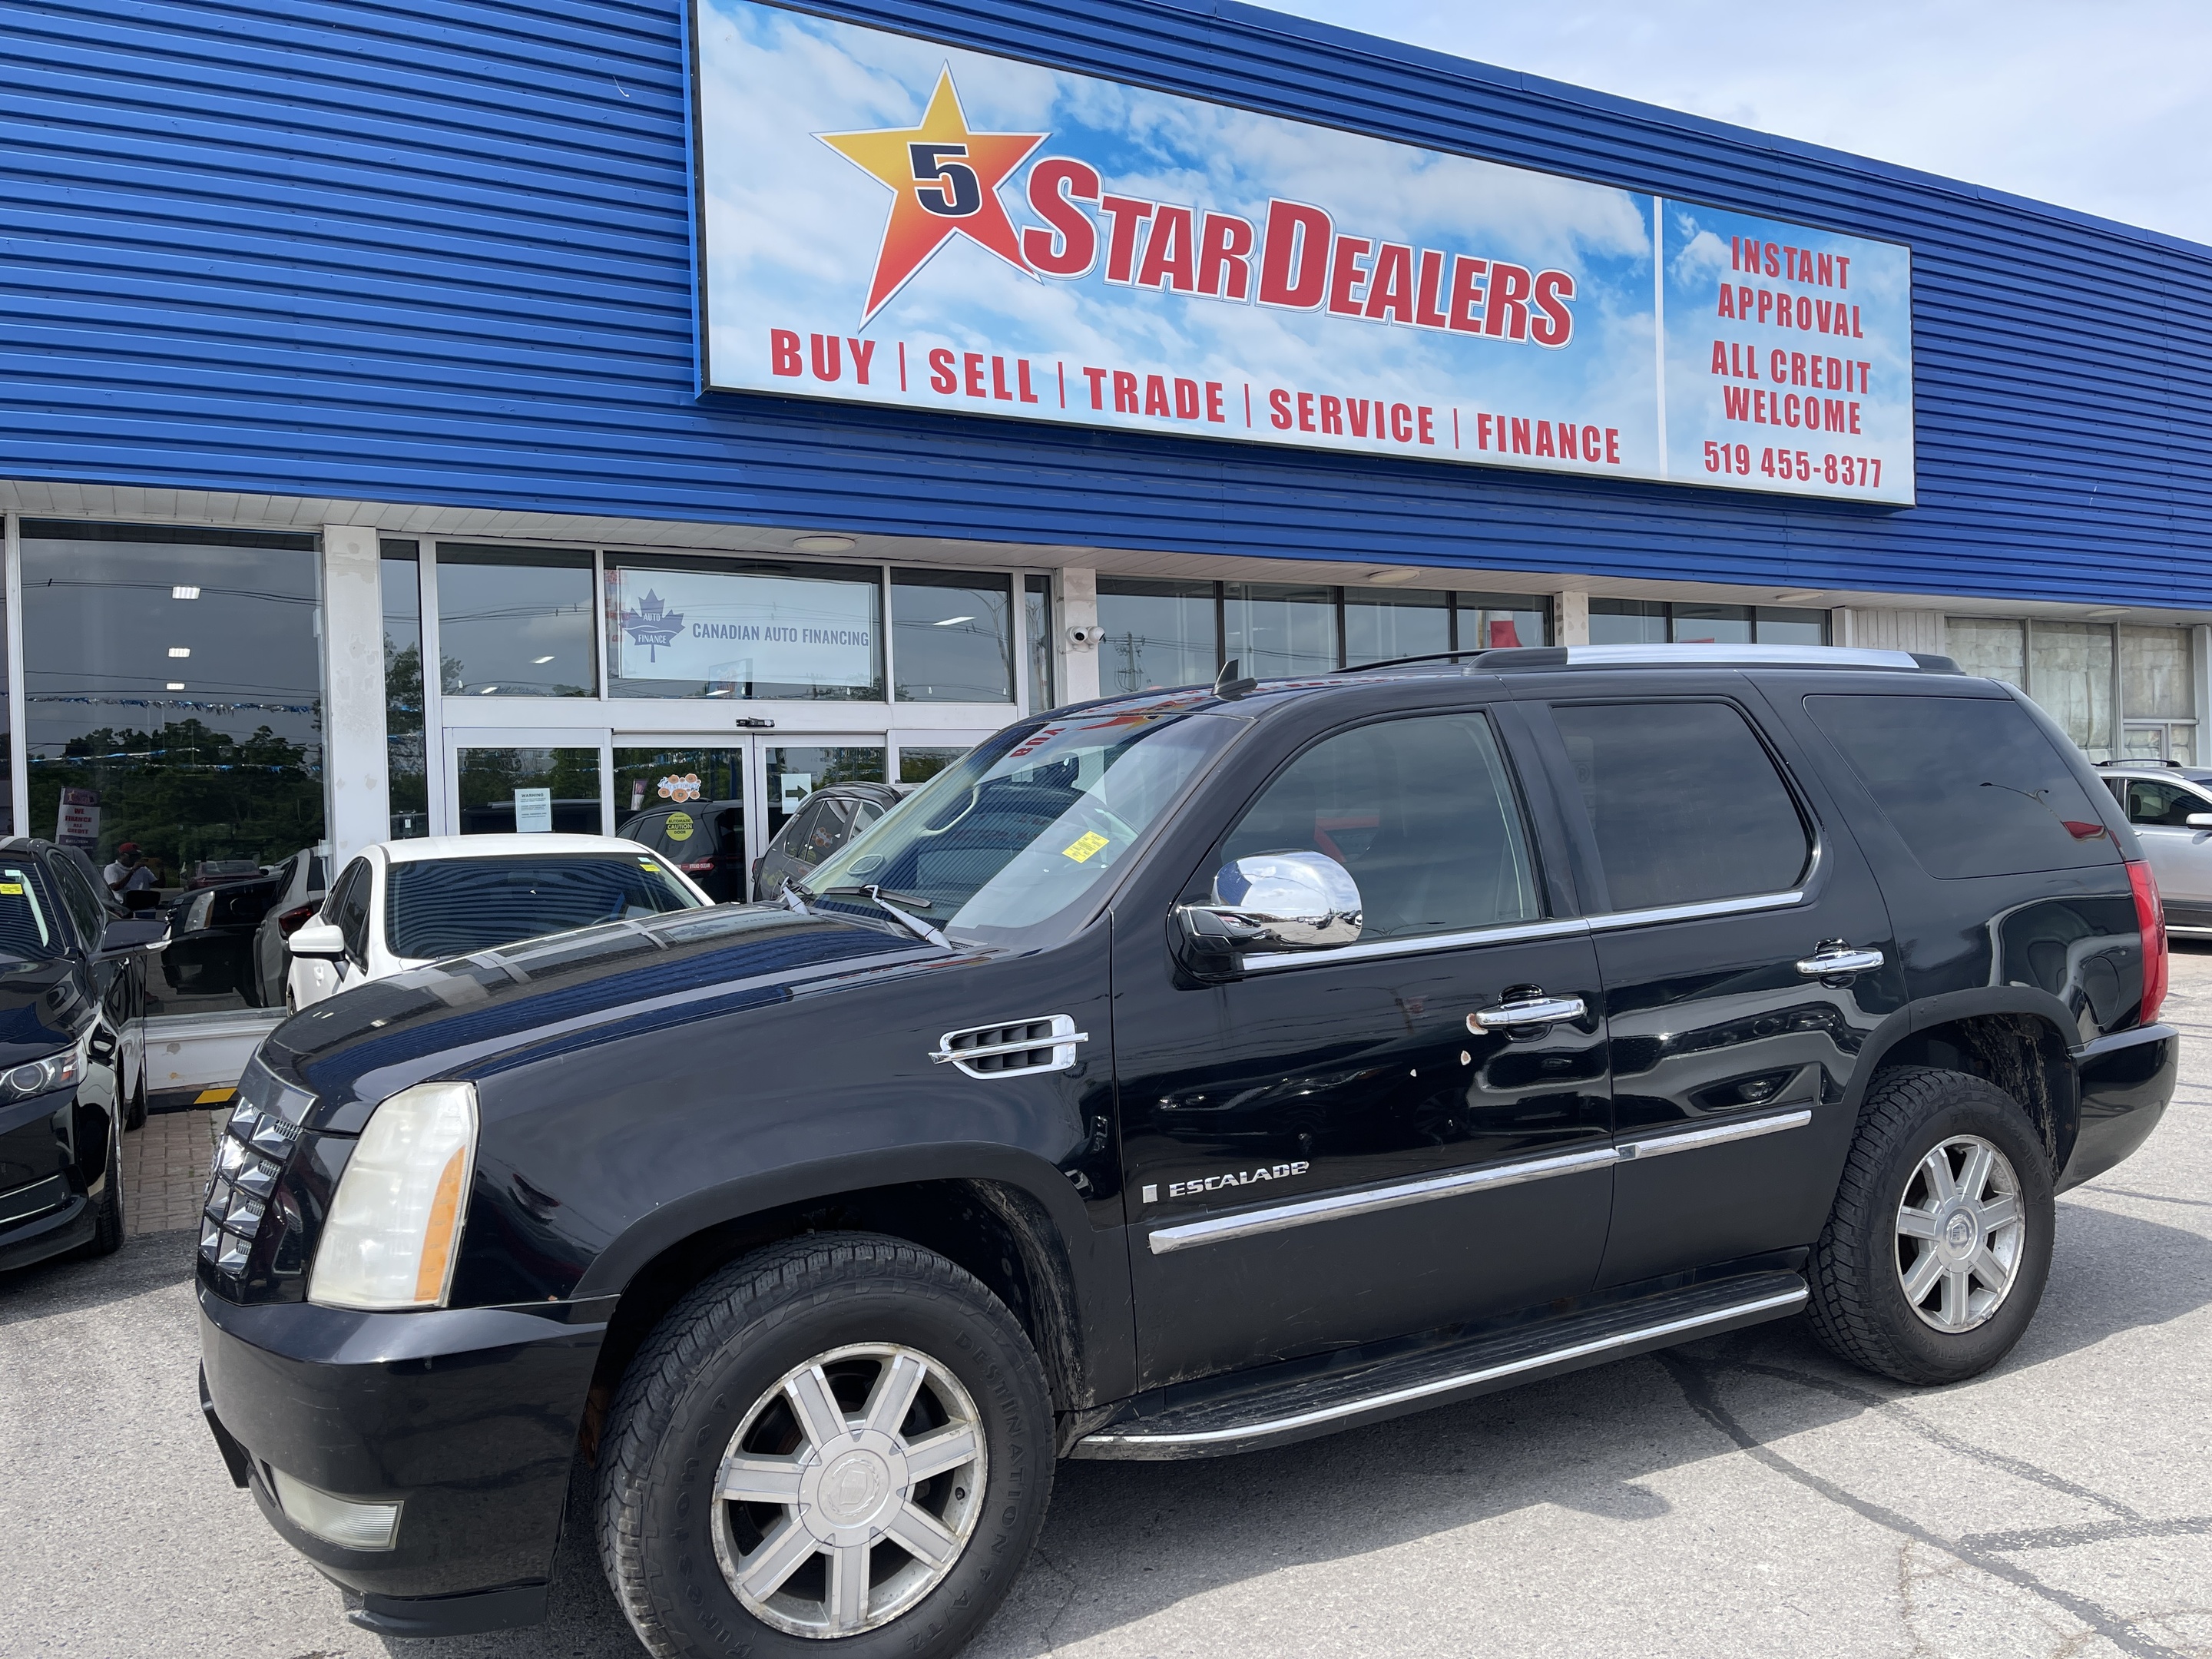 2008 Cadillac Escalade AWD LEATHER H-SEATS LOADED! WE FINANCE ALL CREDIT!